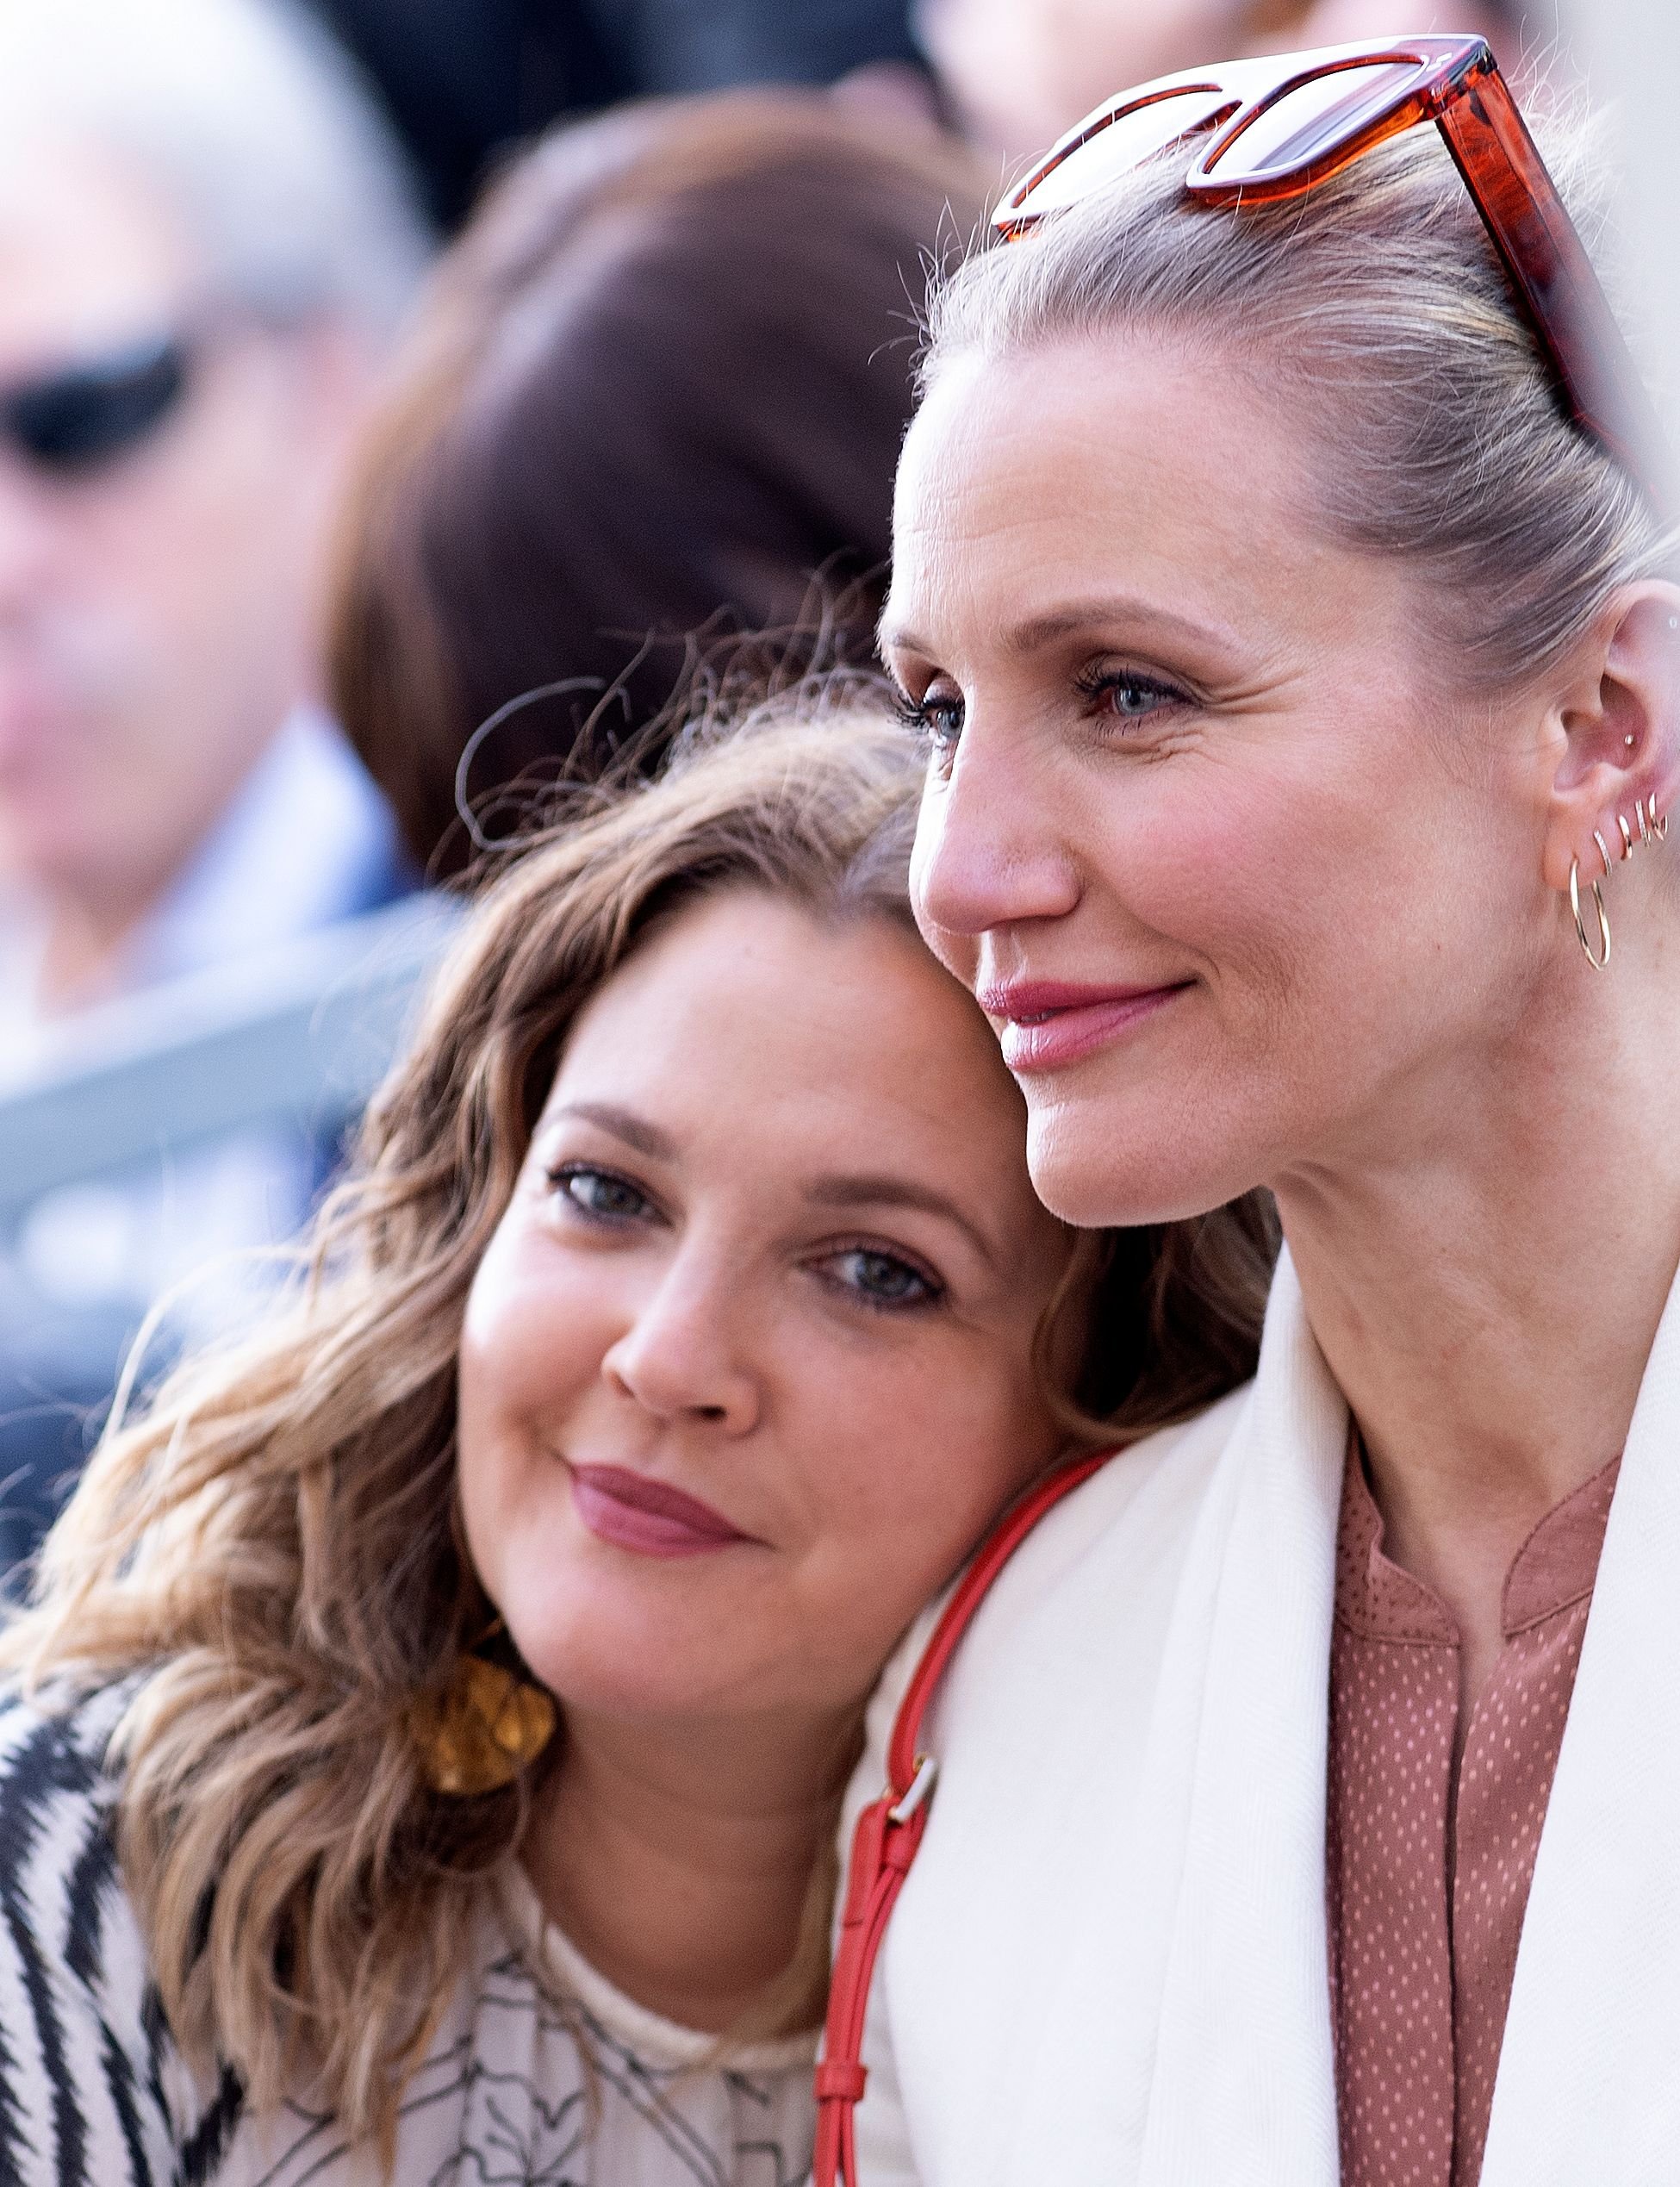 Drew Barrymore and Cameron Diaz at Lucy Liu's Walk of Fame ceremony in Hollywood on May 1, 2019. | Source: Getty Images